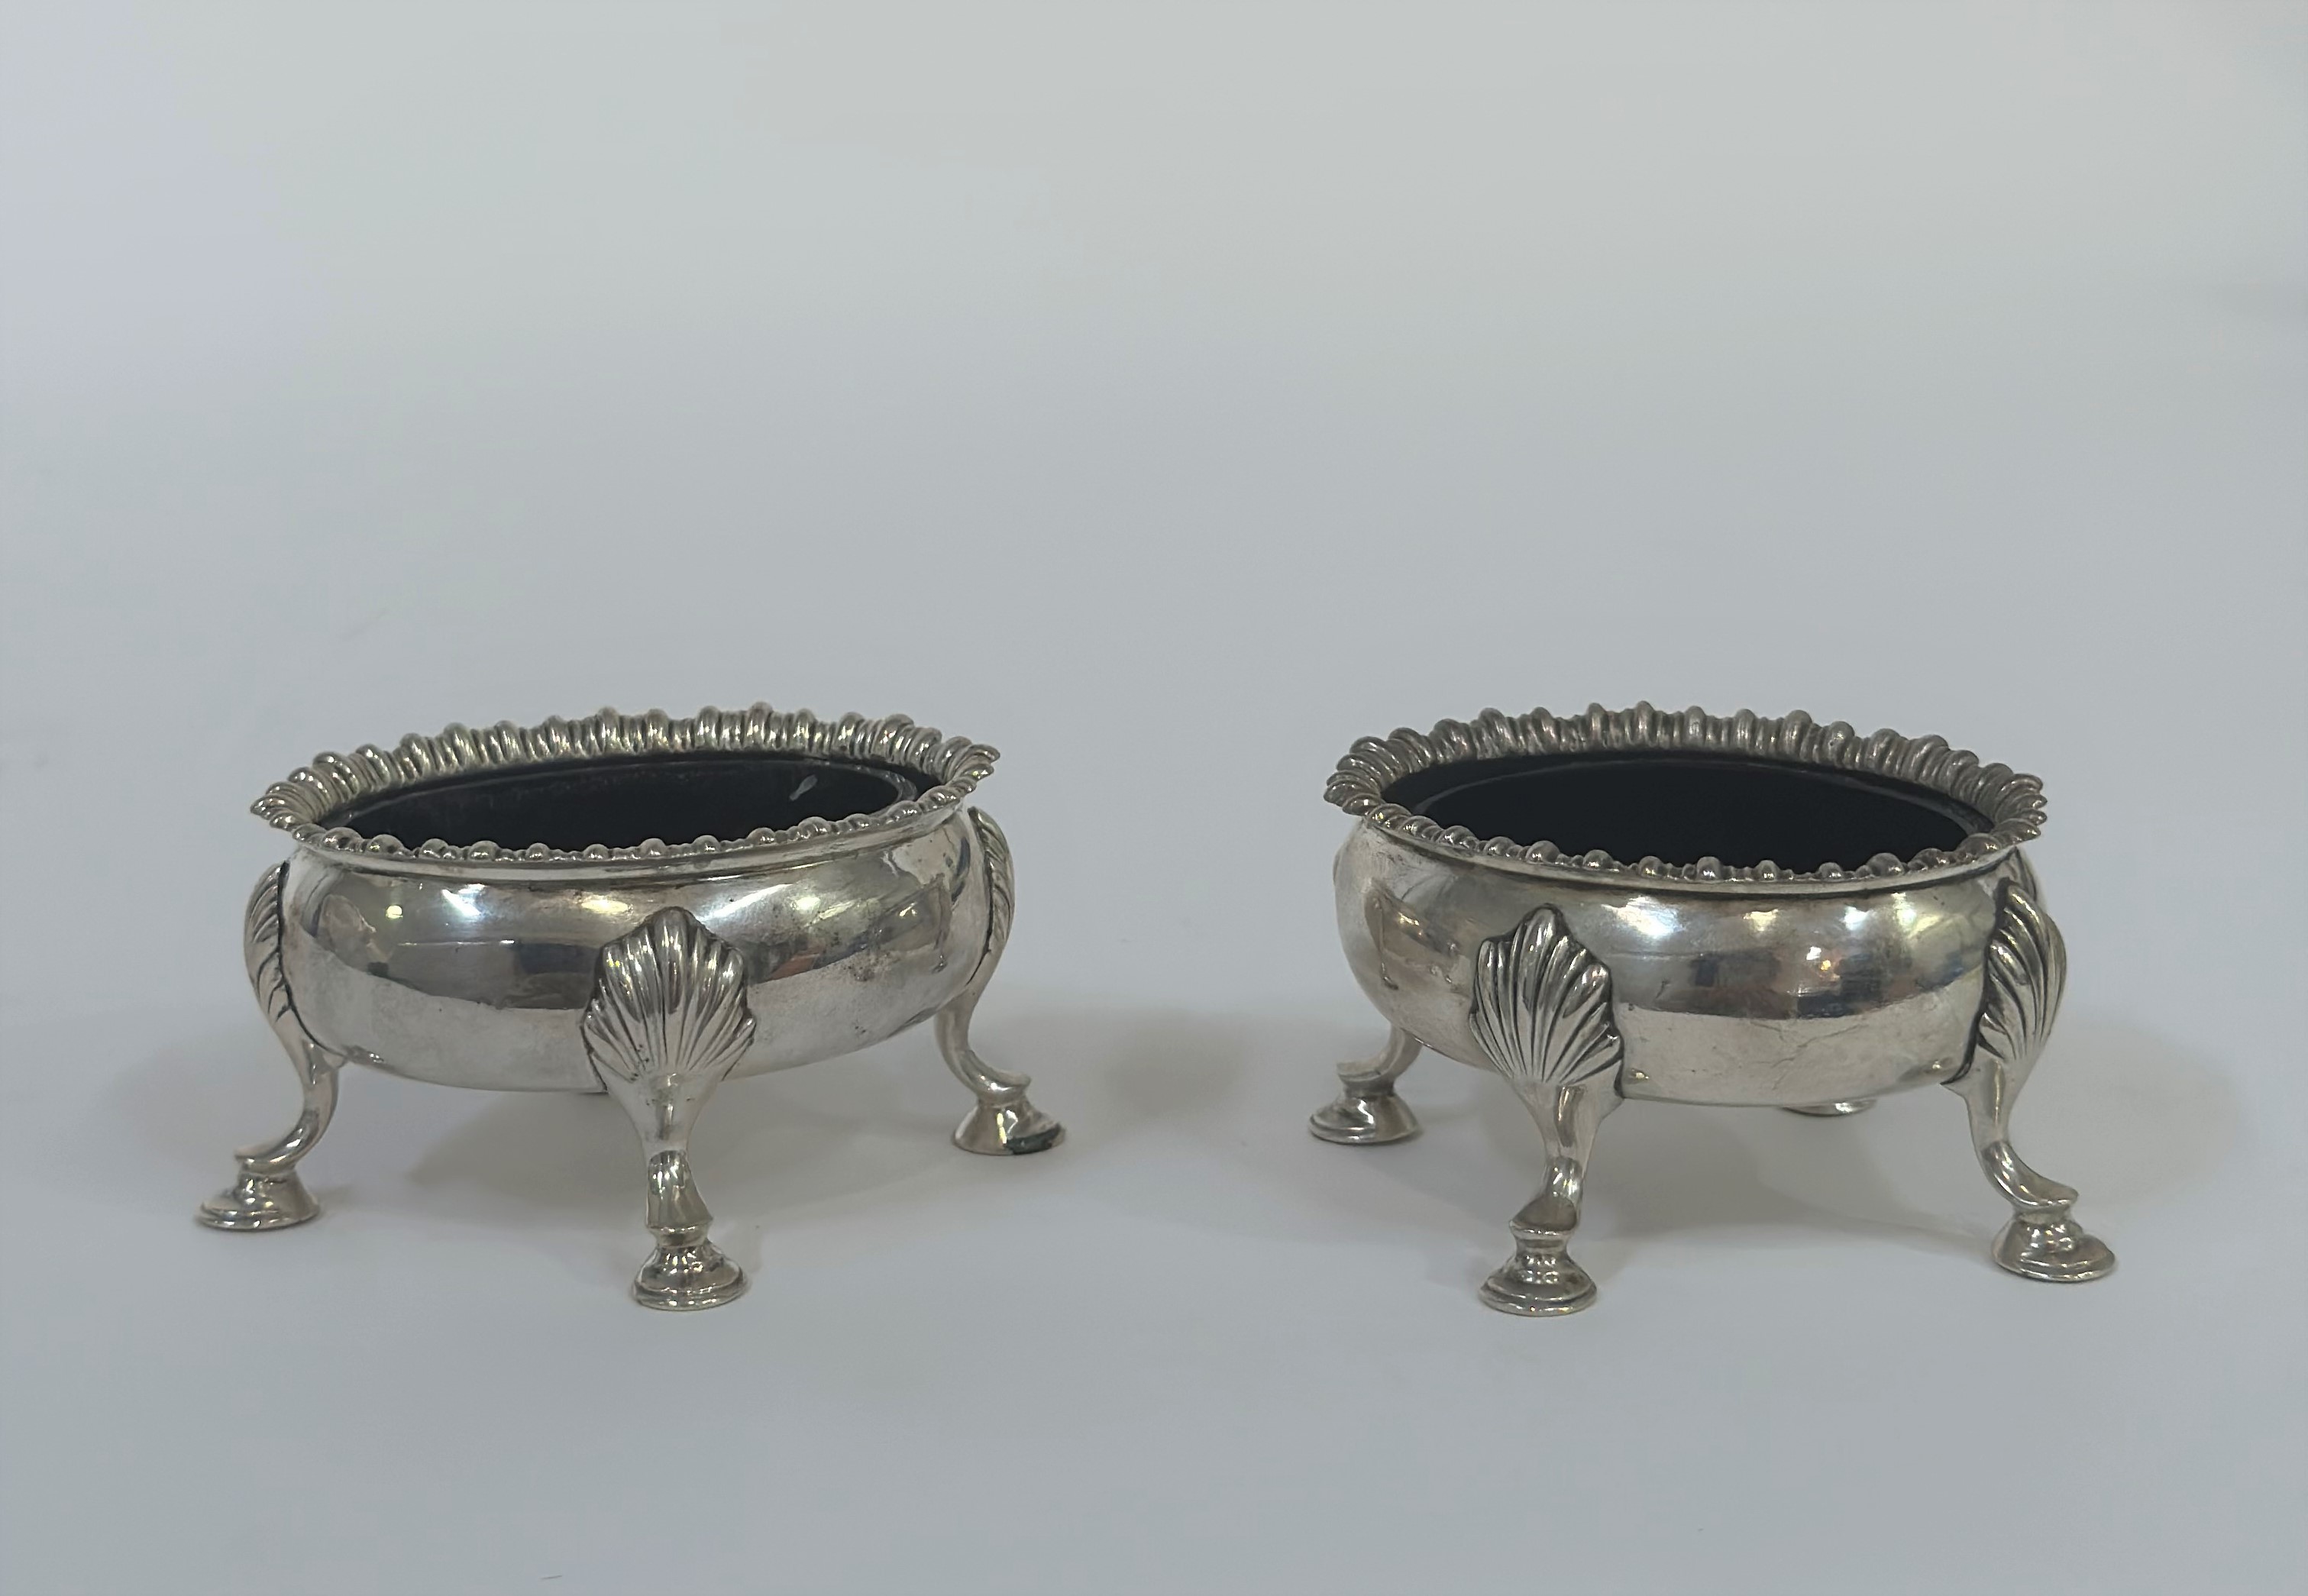 A pair of early George III silver cauldron salts, David and Robert Hennell, London 1768, of oval